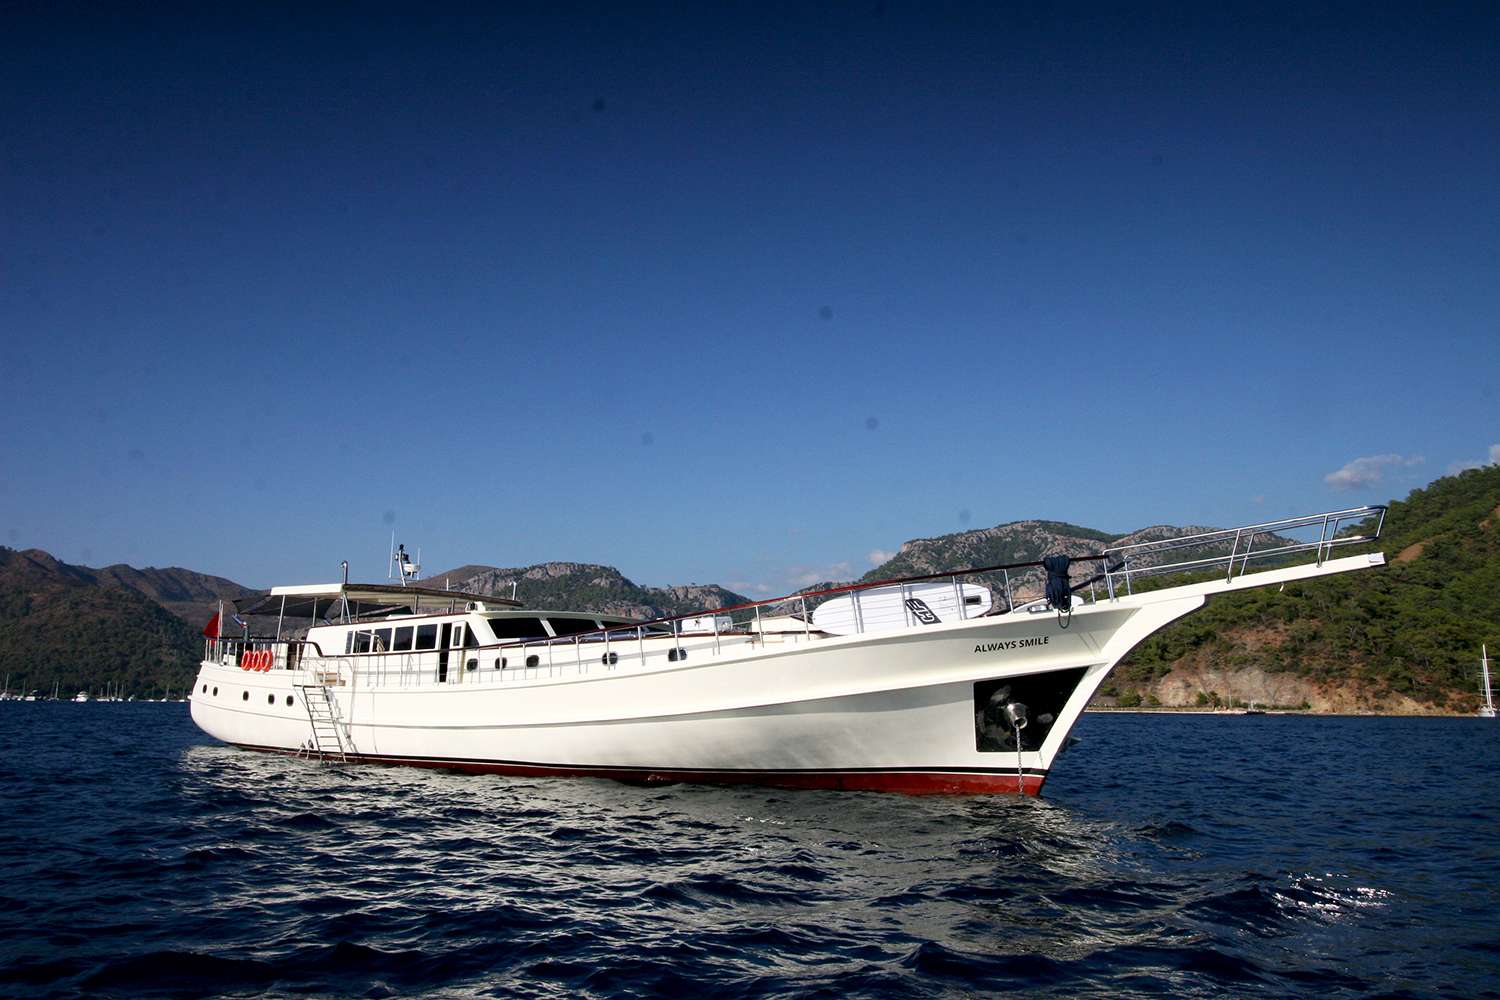 ALWAYS SMILE - Yacht Charter Marmaris & Boat hire in Turkey 1